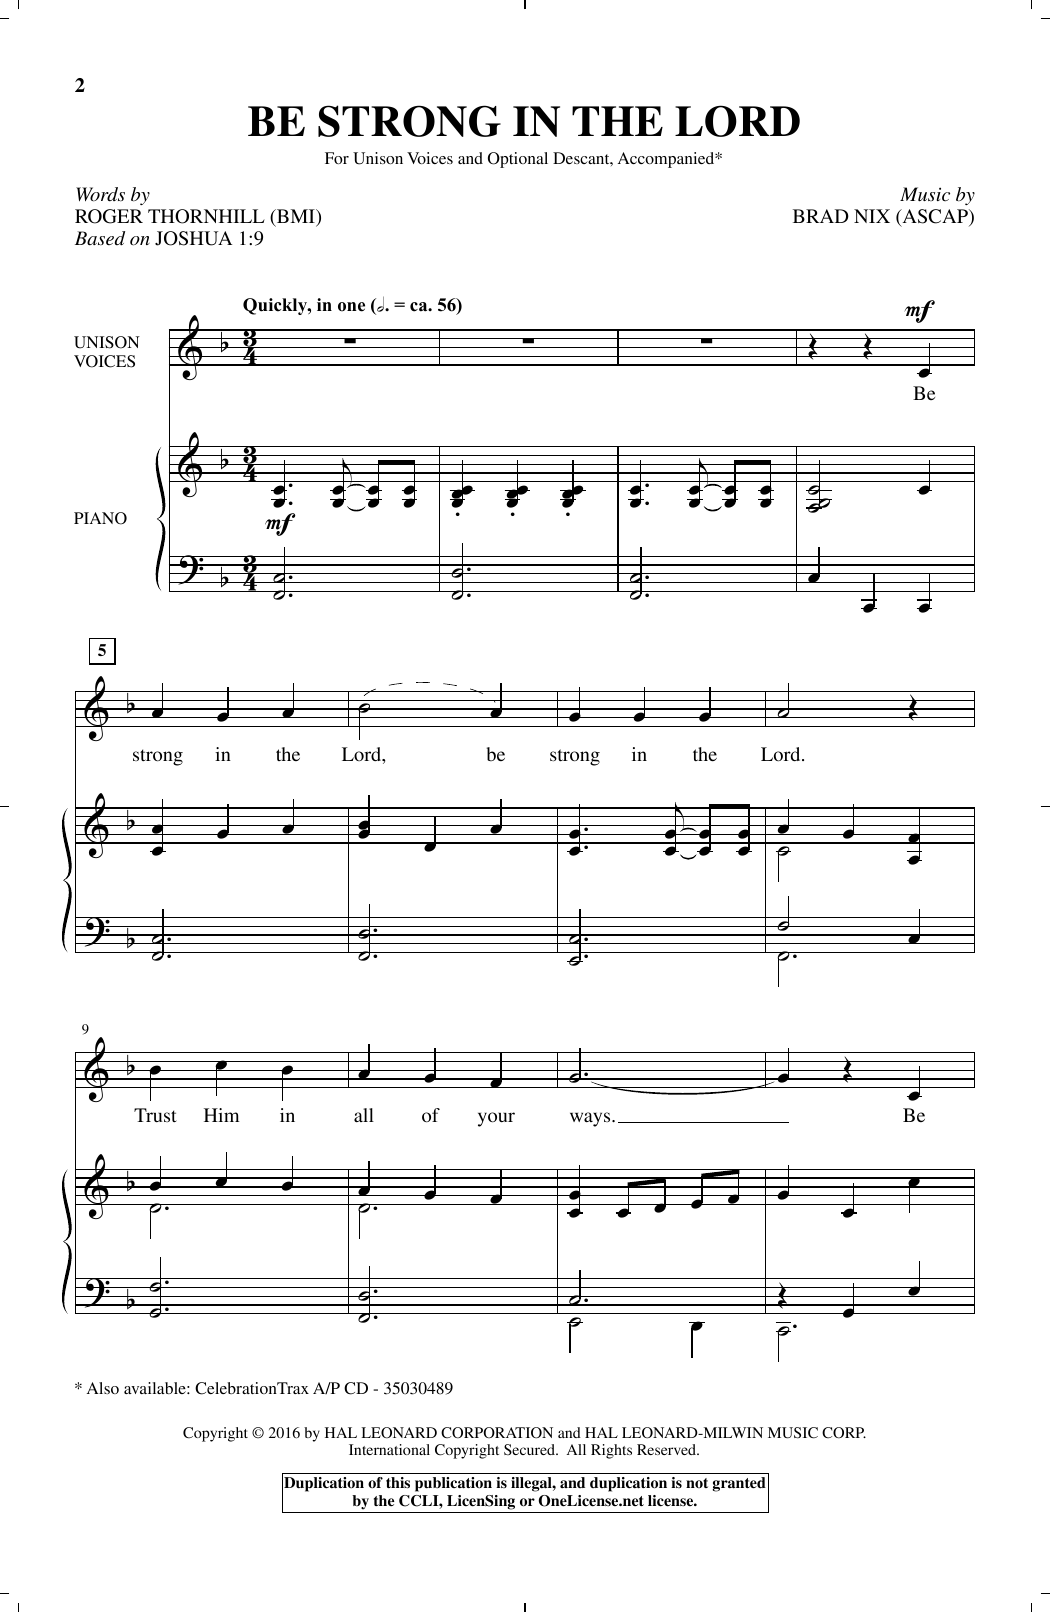 Download Brad Nix Be Strong In The Lord Sheet Music